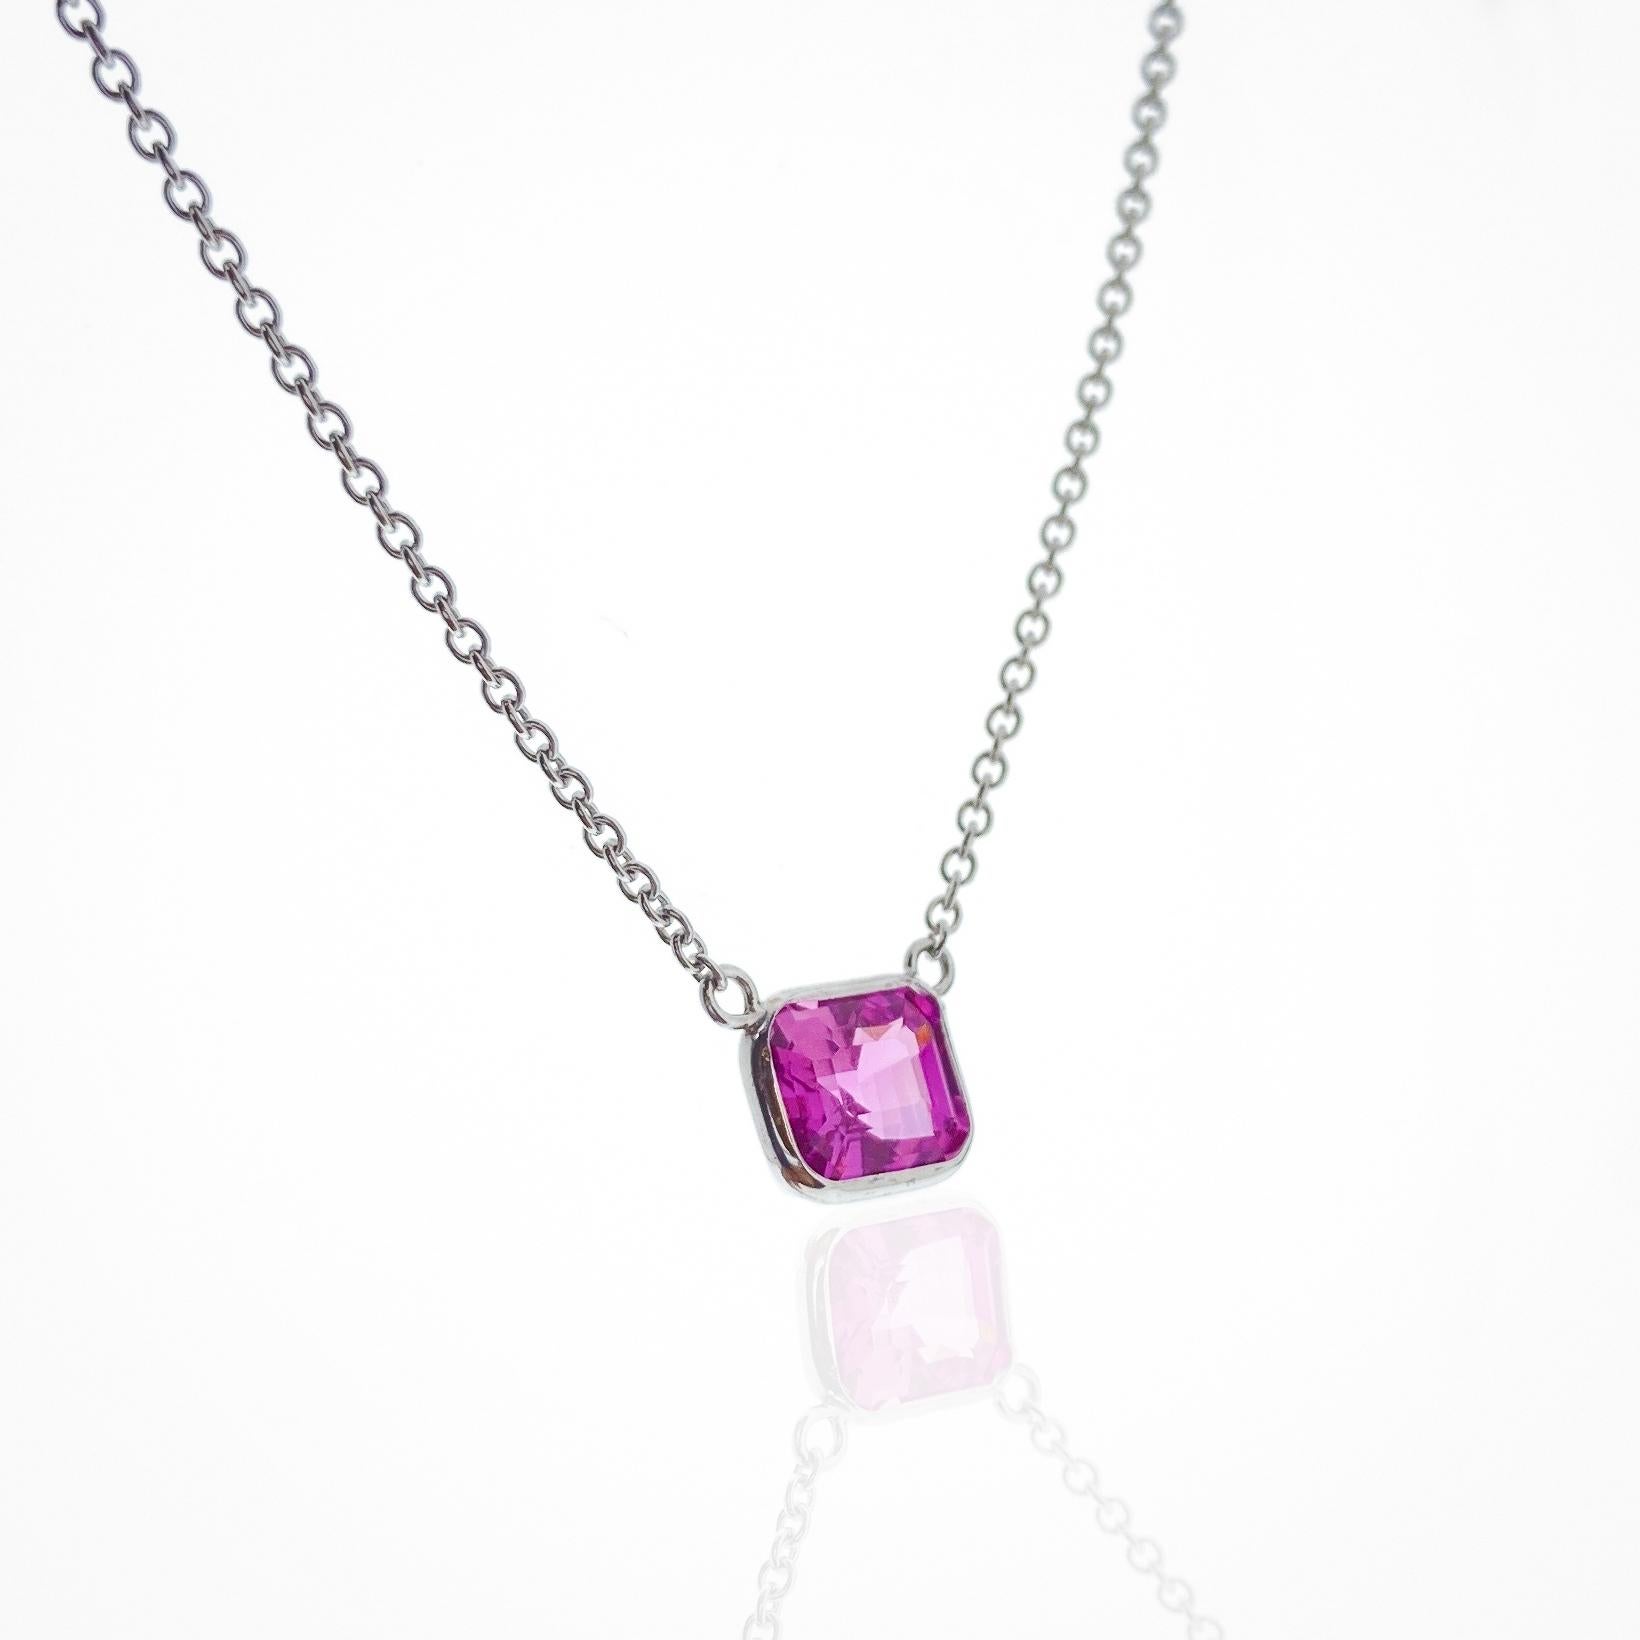 This necklace features an emerald-cut pink sapphire with a weight of 1.60 carats, set in 14k white gold (WG). Pink sapphires are a rare and beautiful choice for jewelry, and an emerald cut can accentuate the gem's natural beauty. Sapphire necklaces